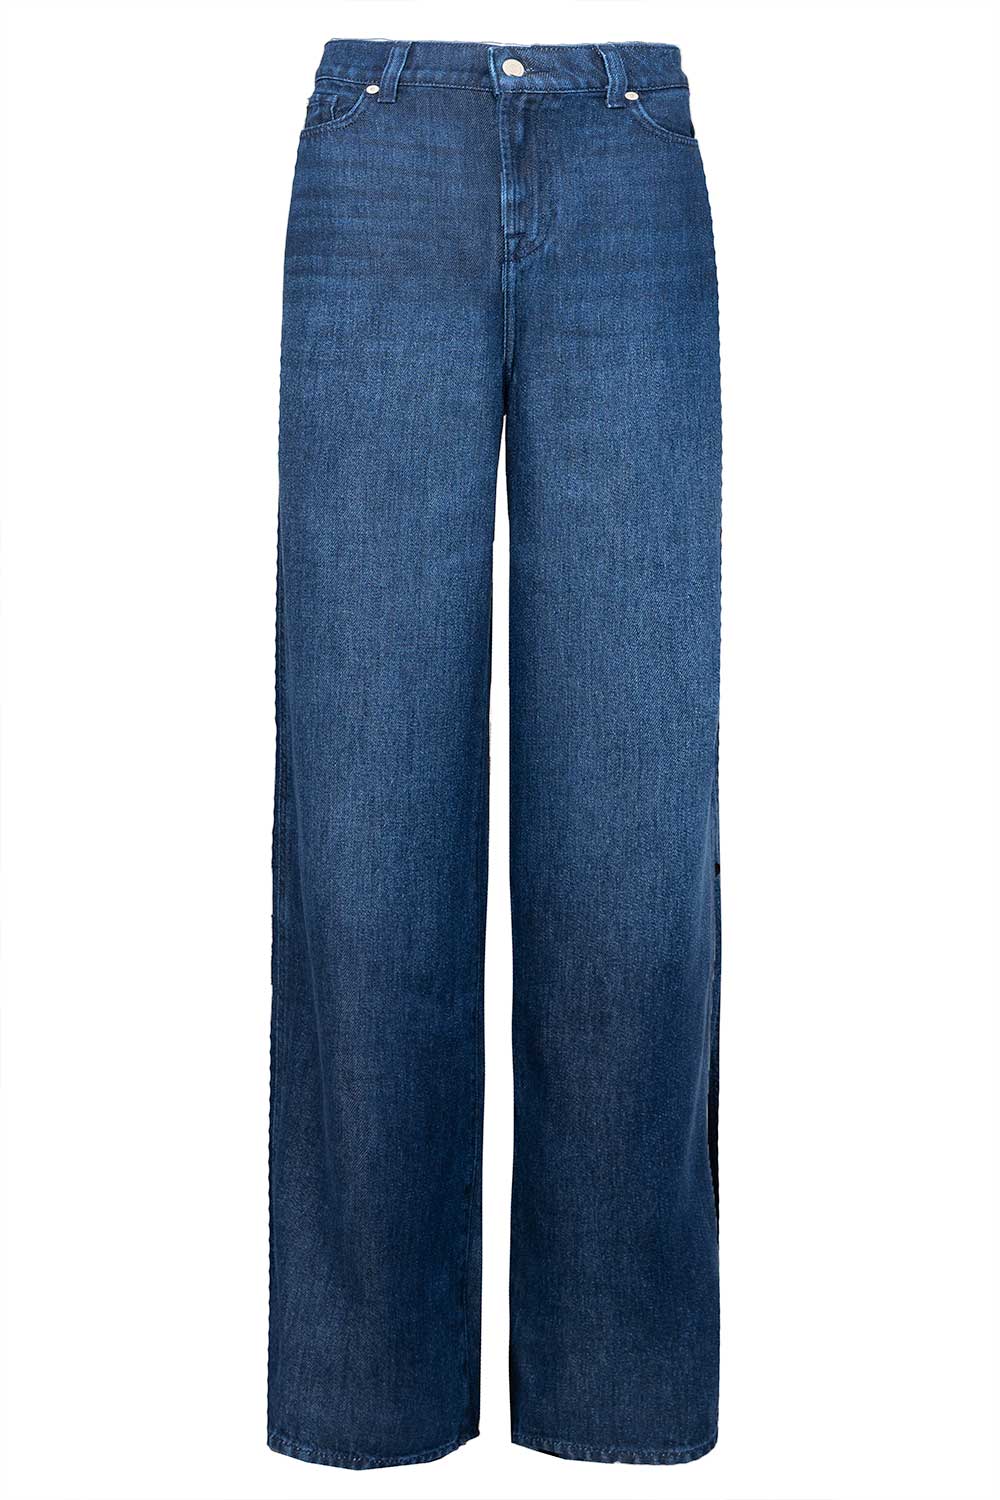 7 For All Mankind Tencel non-stretch wide leg jeans Scout blauw